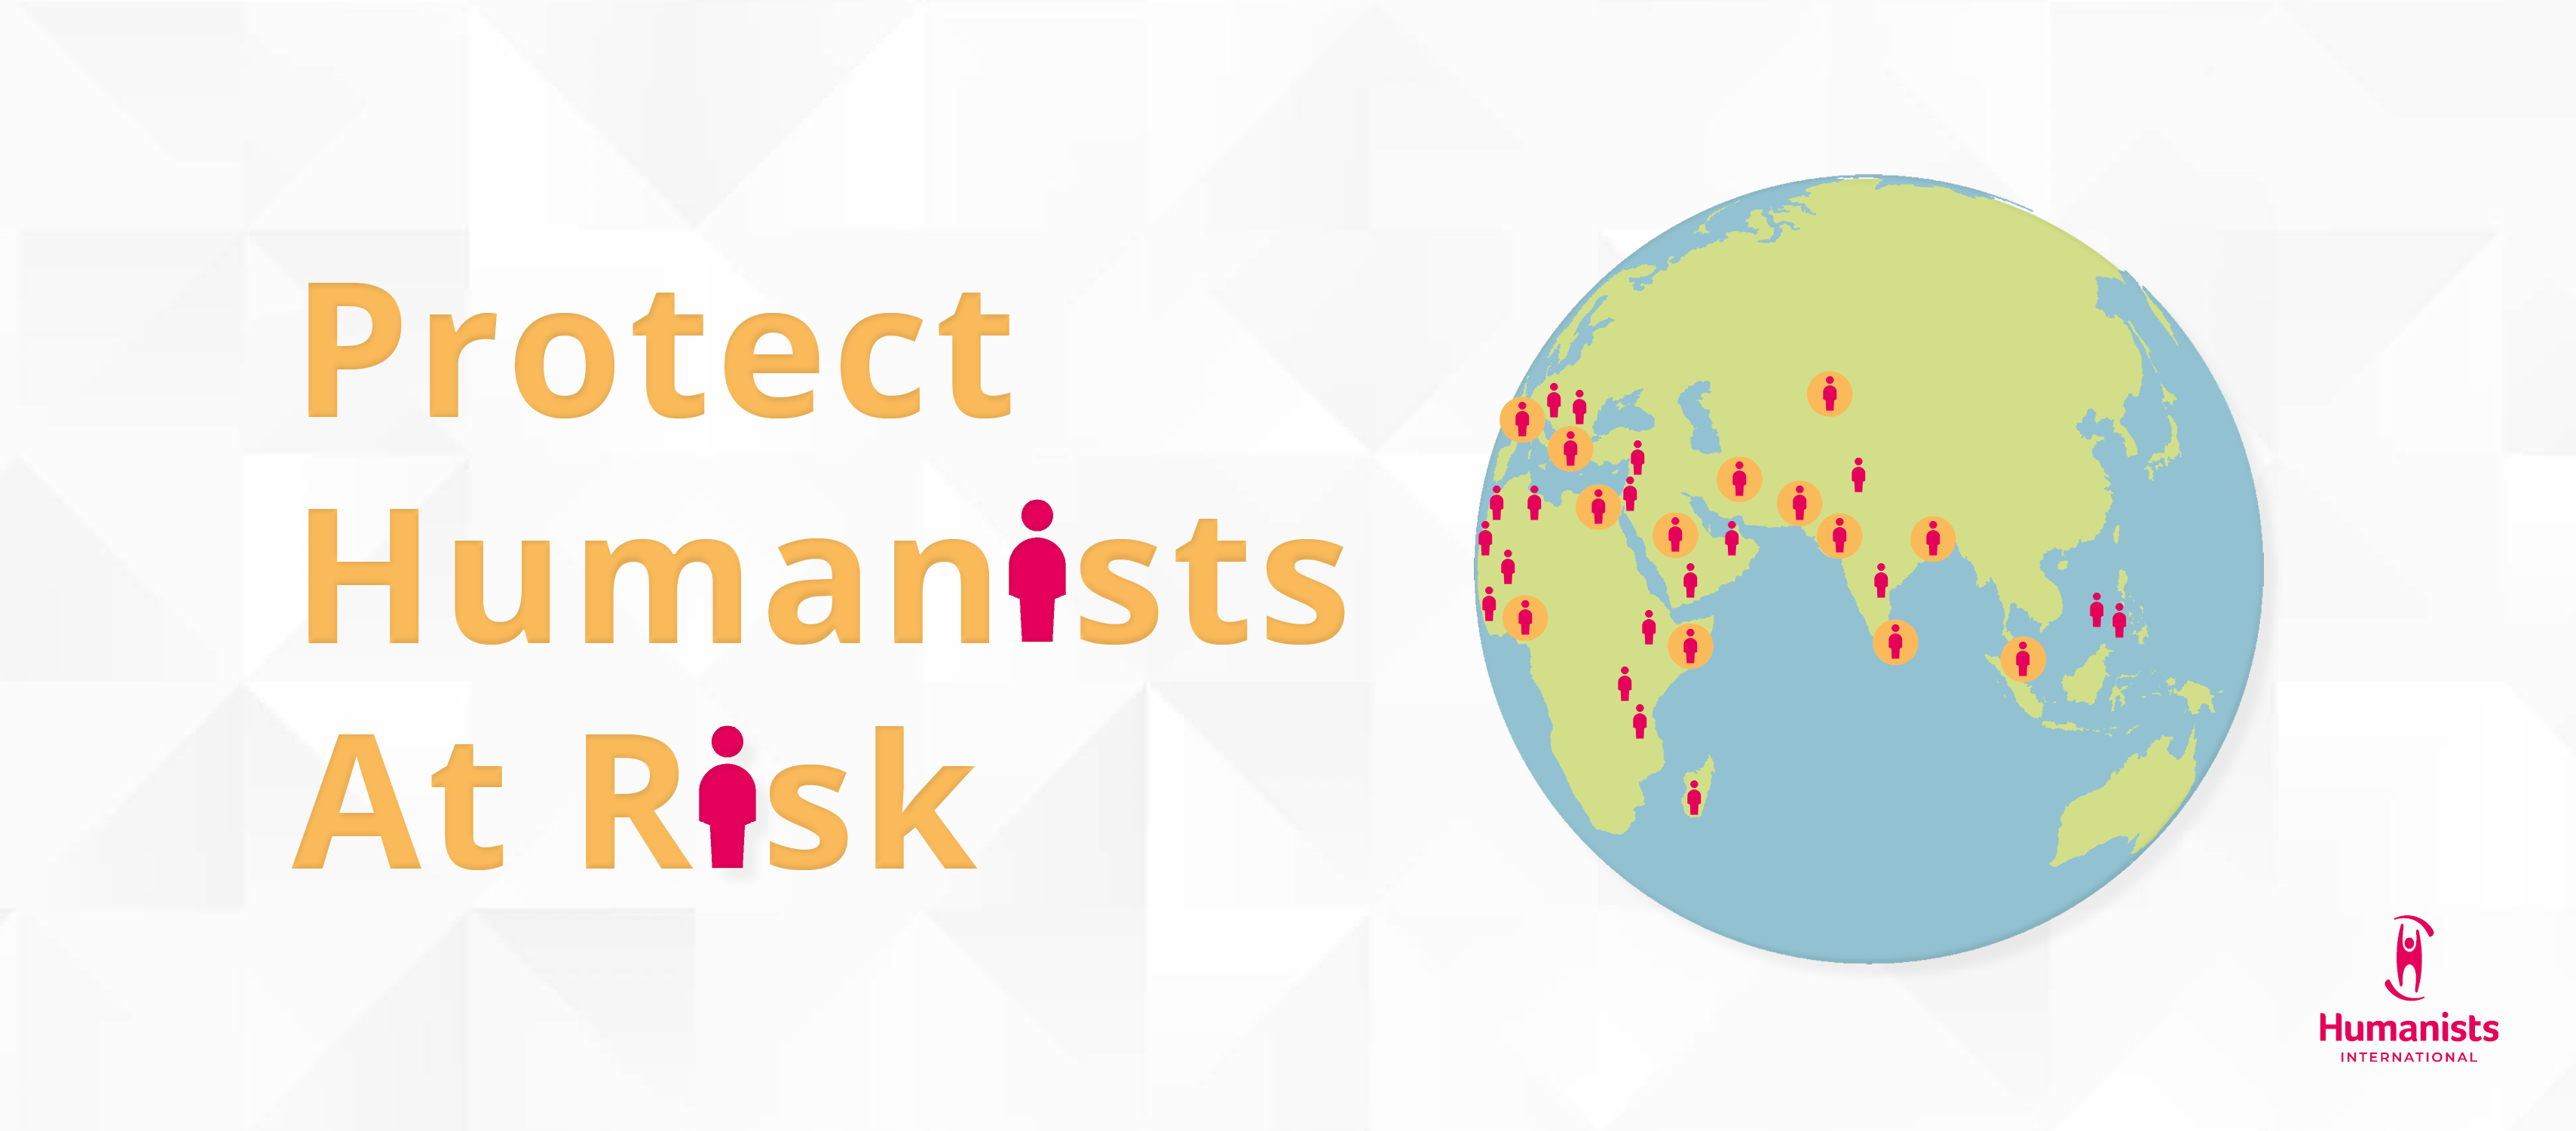 Protect Humanists At Risk